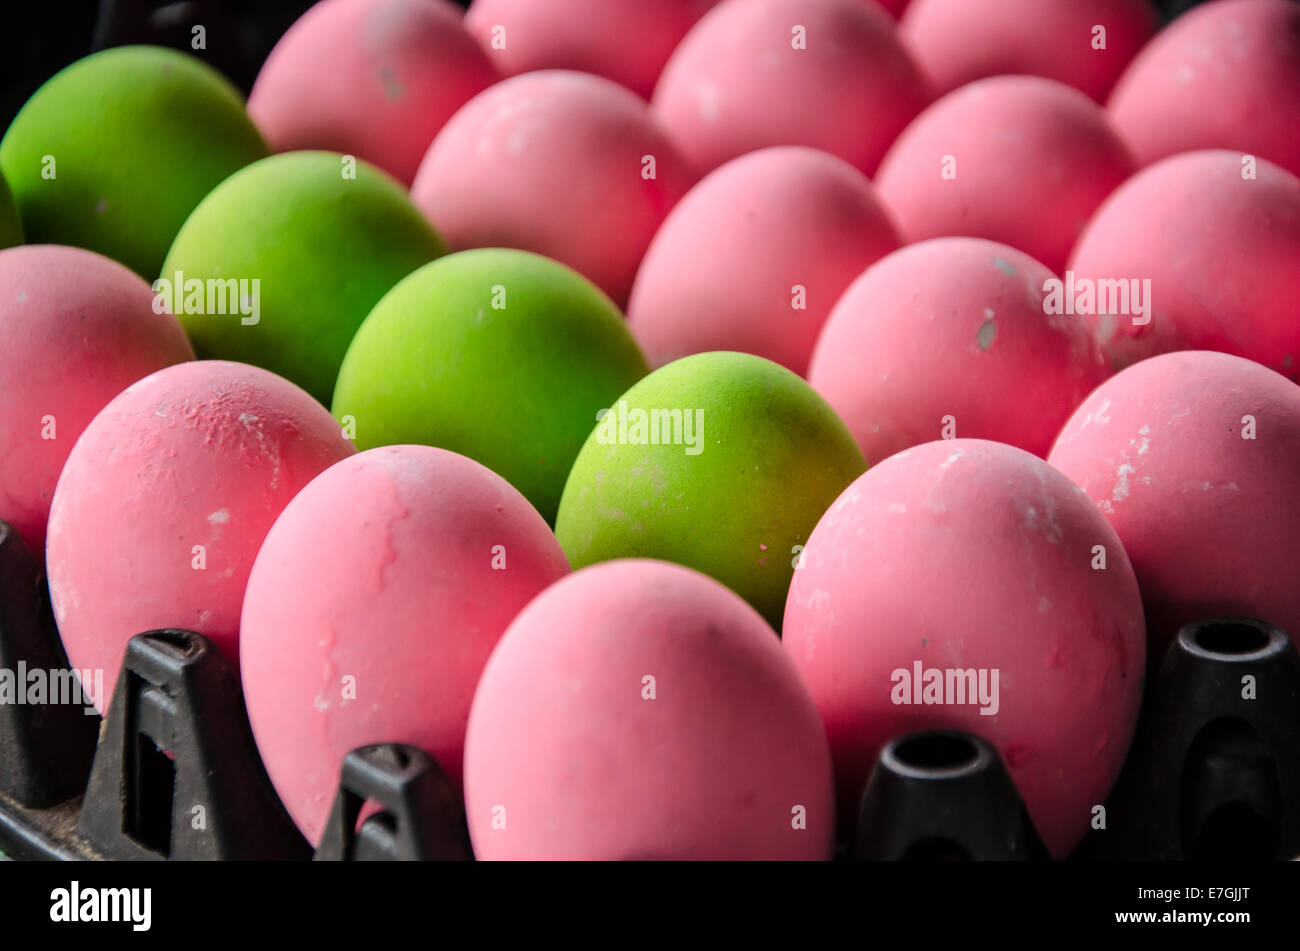 colorful of pink and green egg Stock Photo